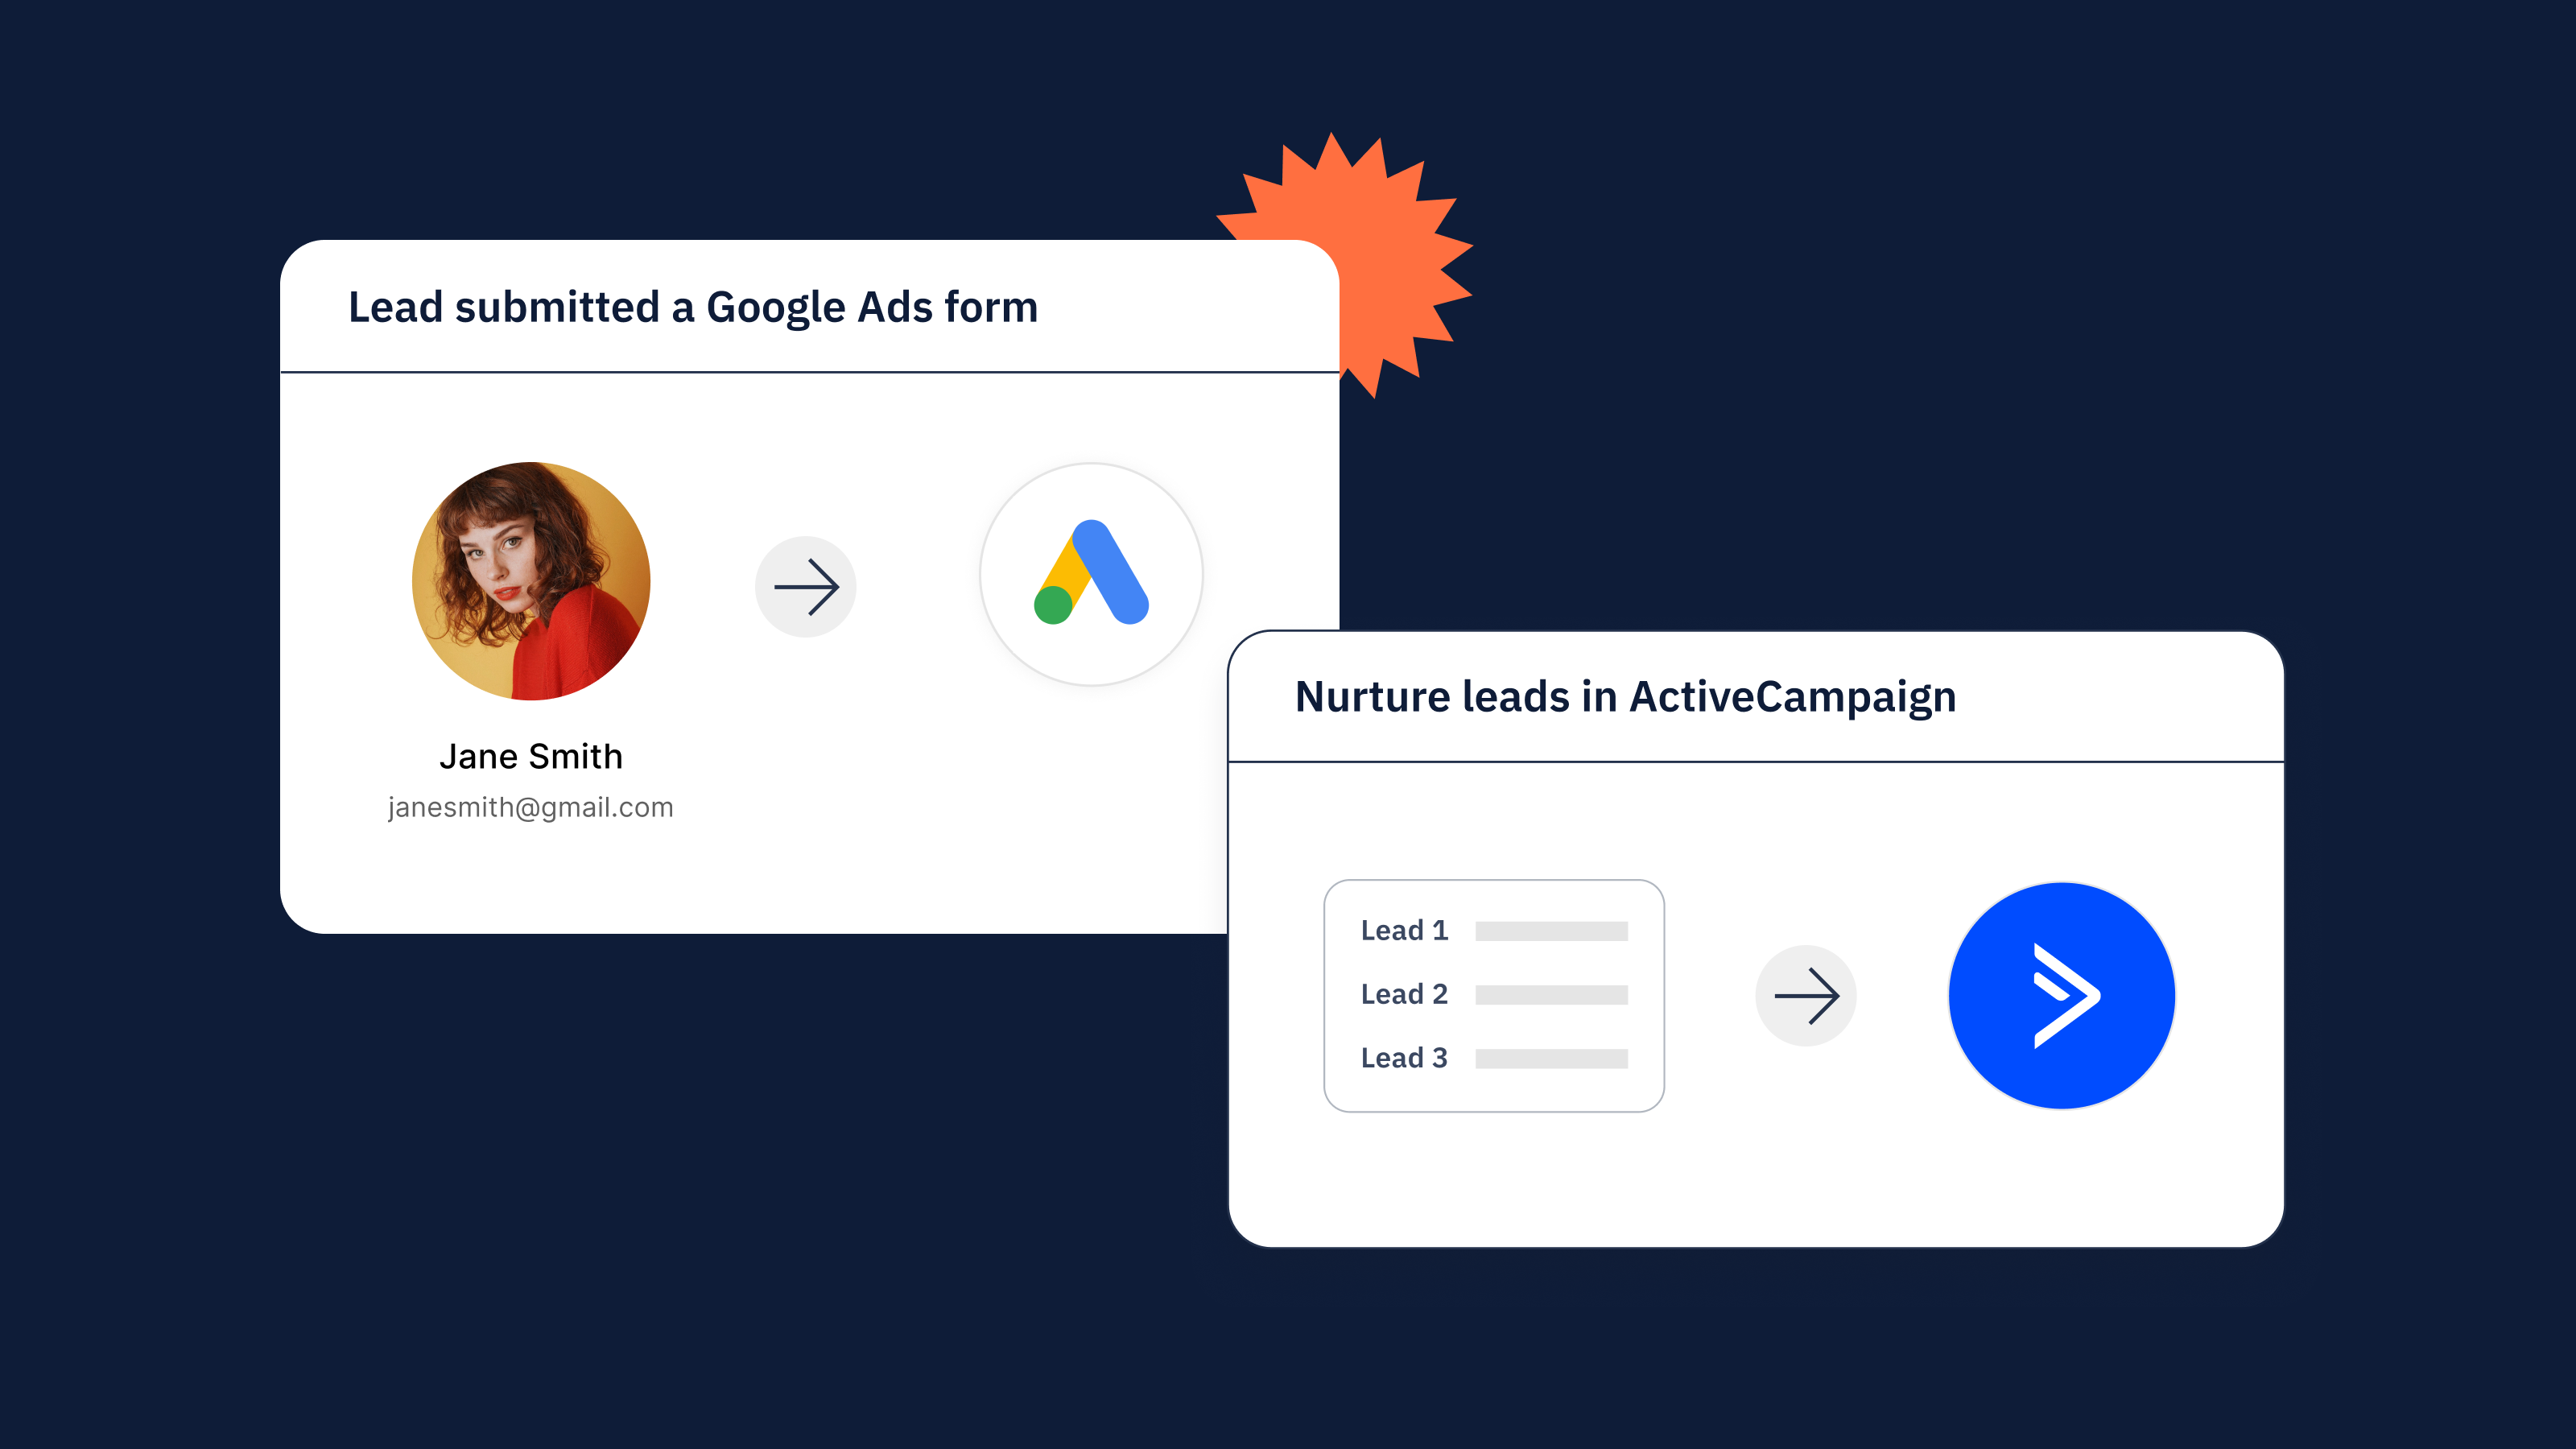 Maximize your reach and conversion with ActiveCampaign and Google Ads